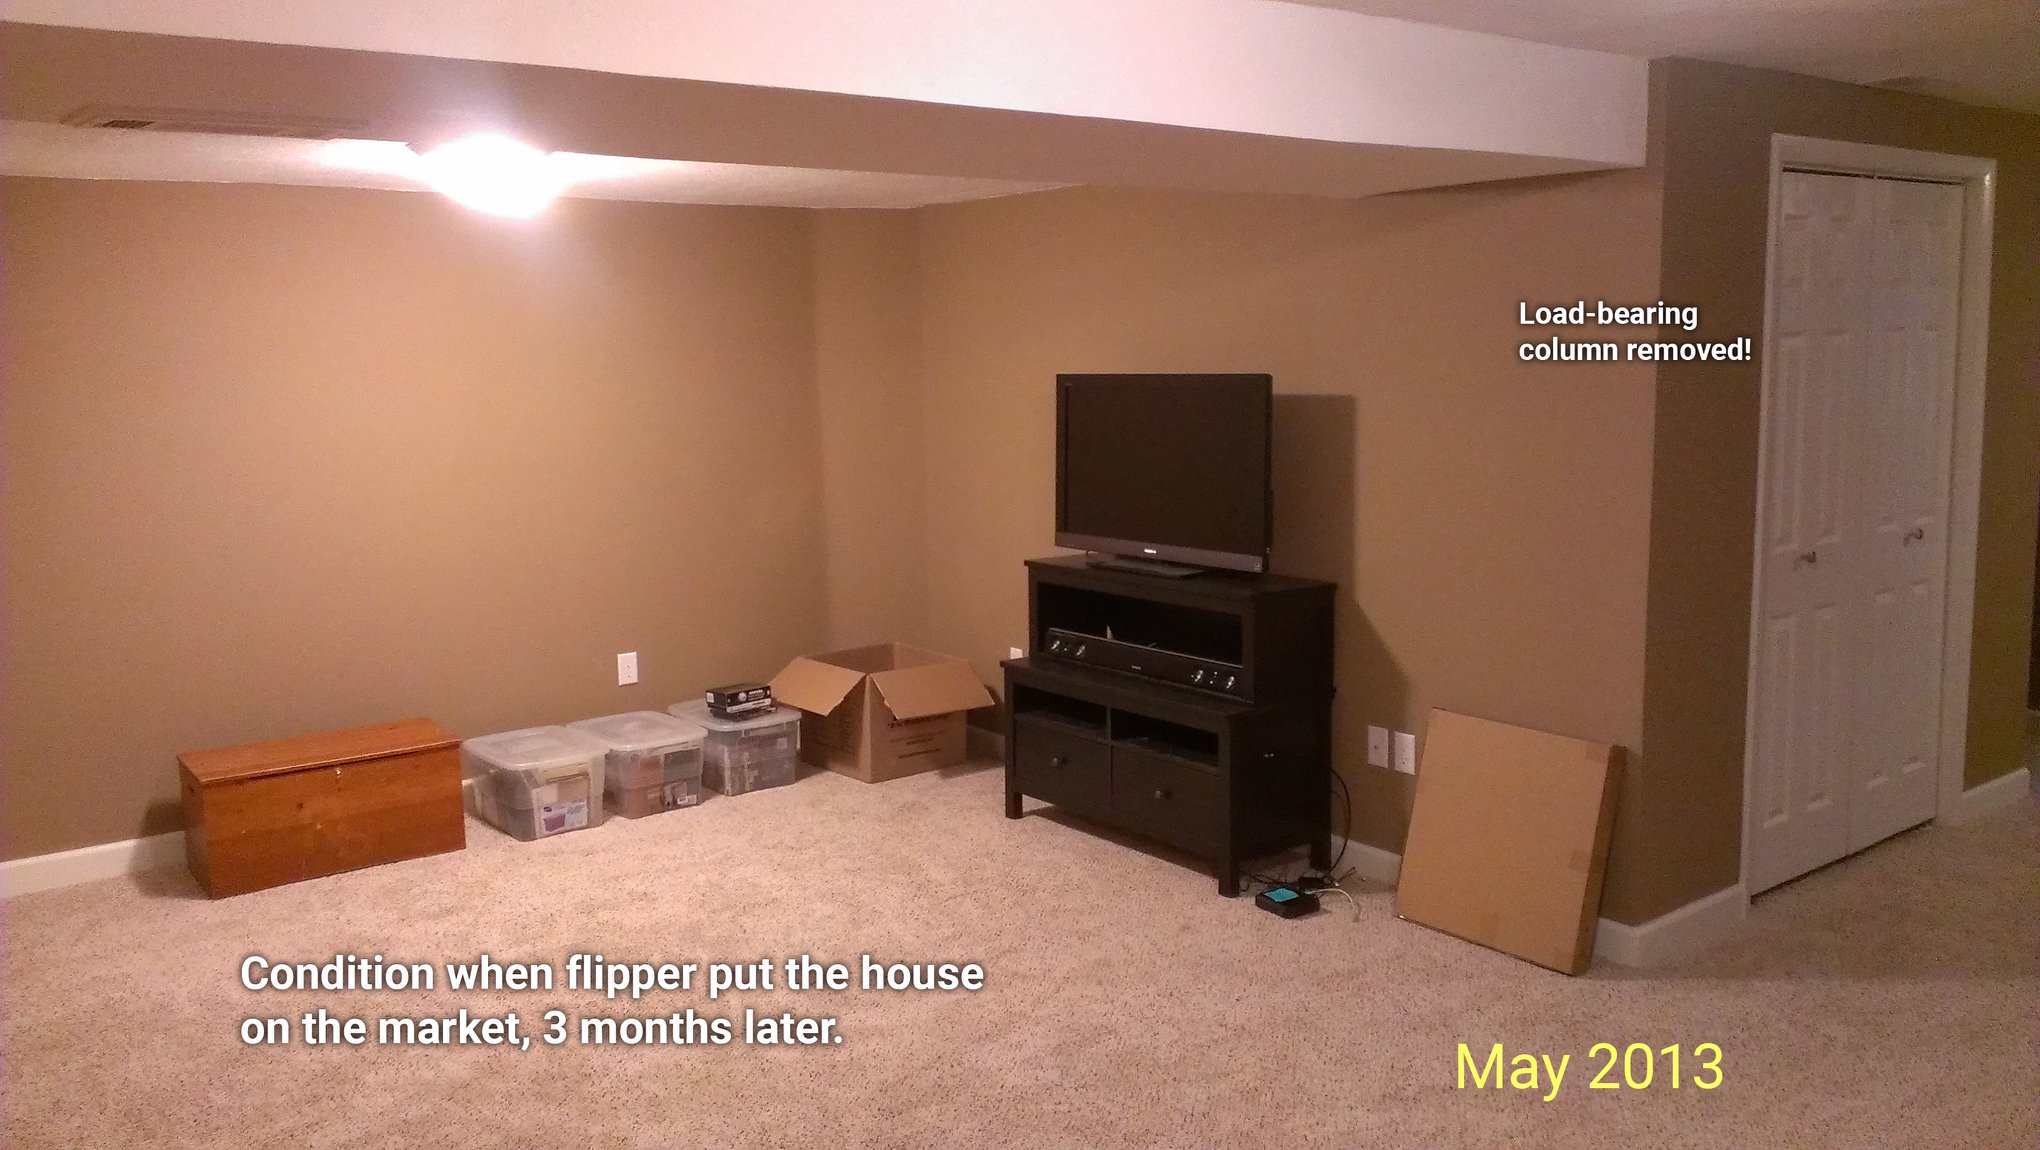 A basement room showing the condition of the house when a flipper put it back on the market in May of 2013. A load bearing column has been removed and is missing from the photo.